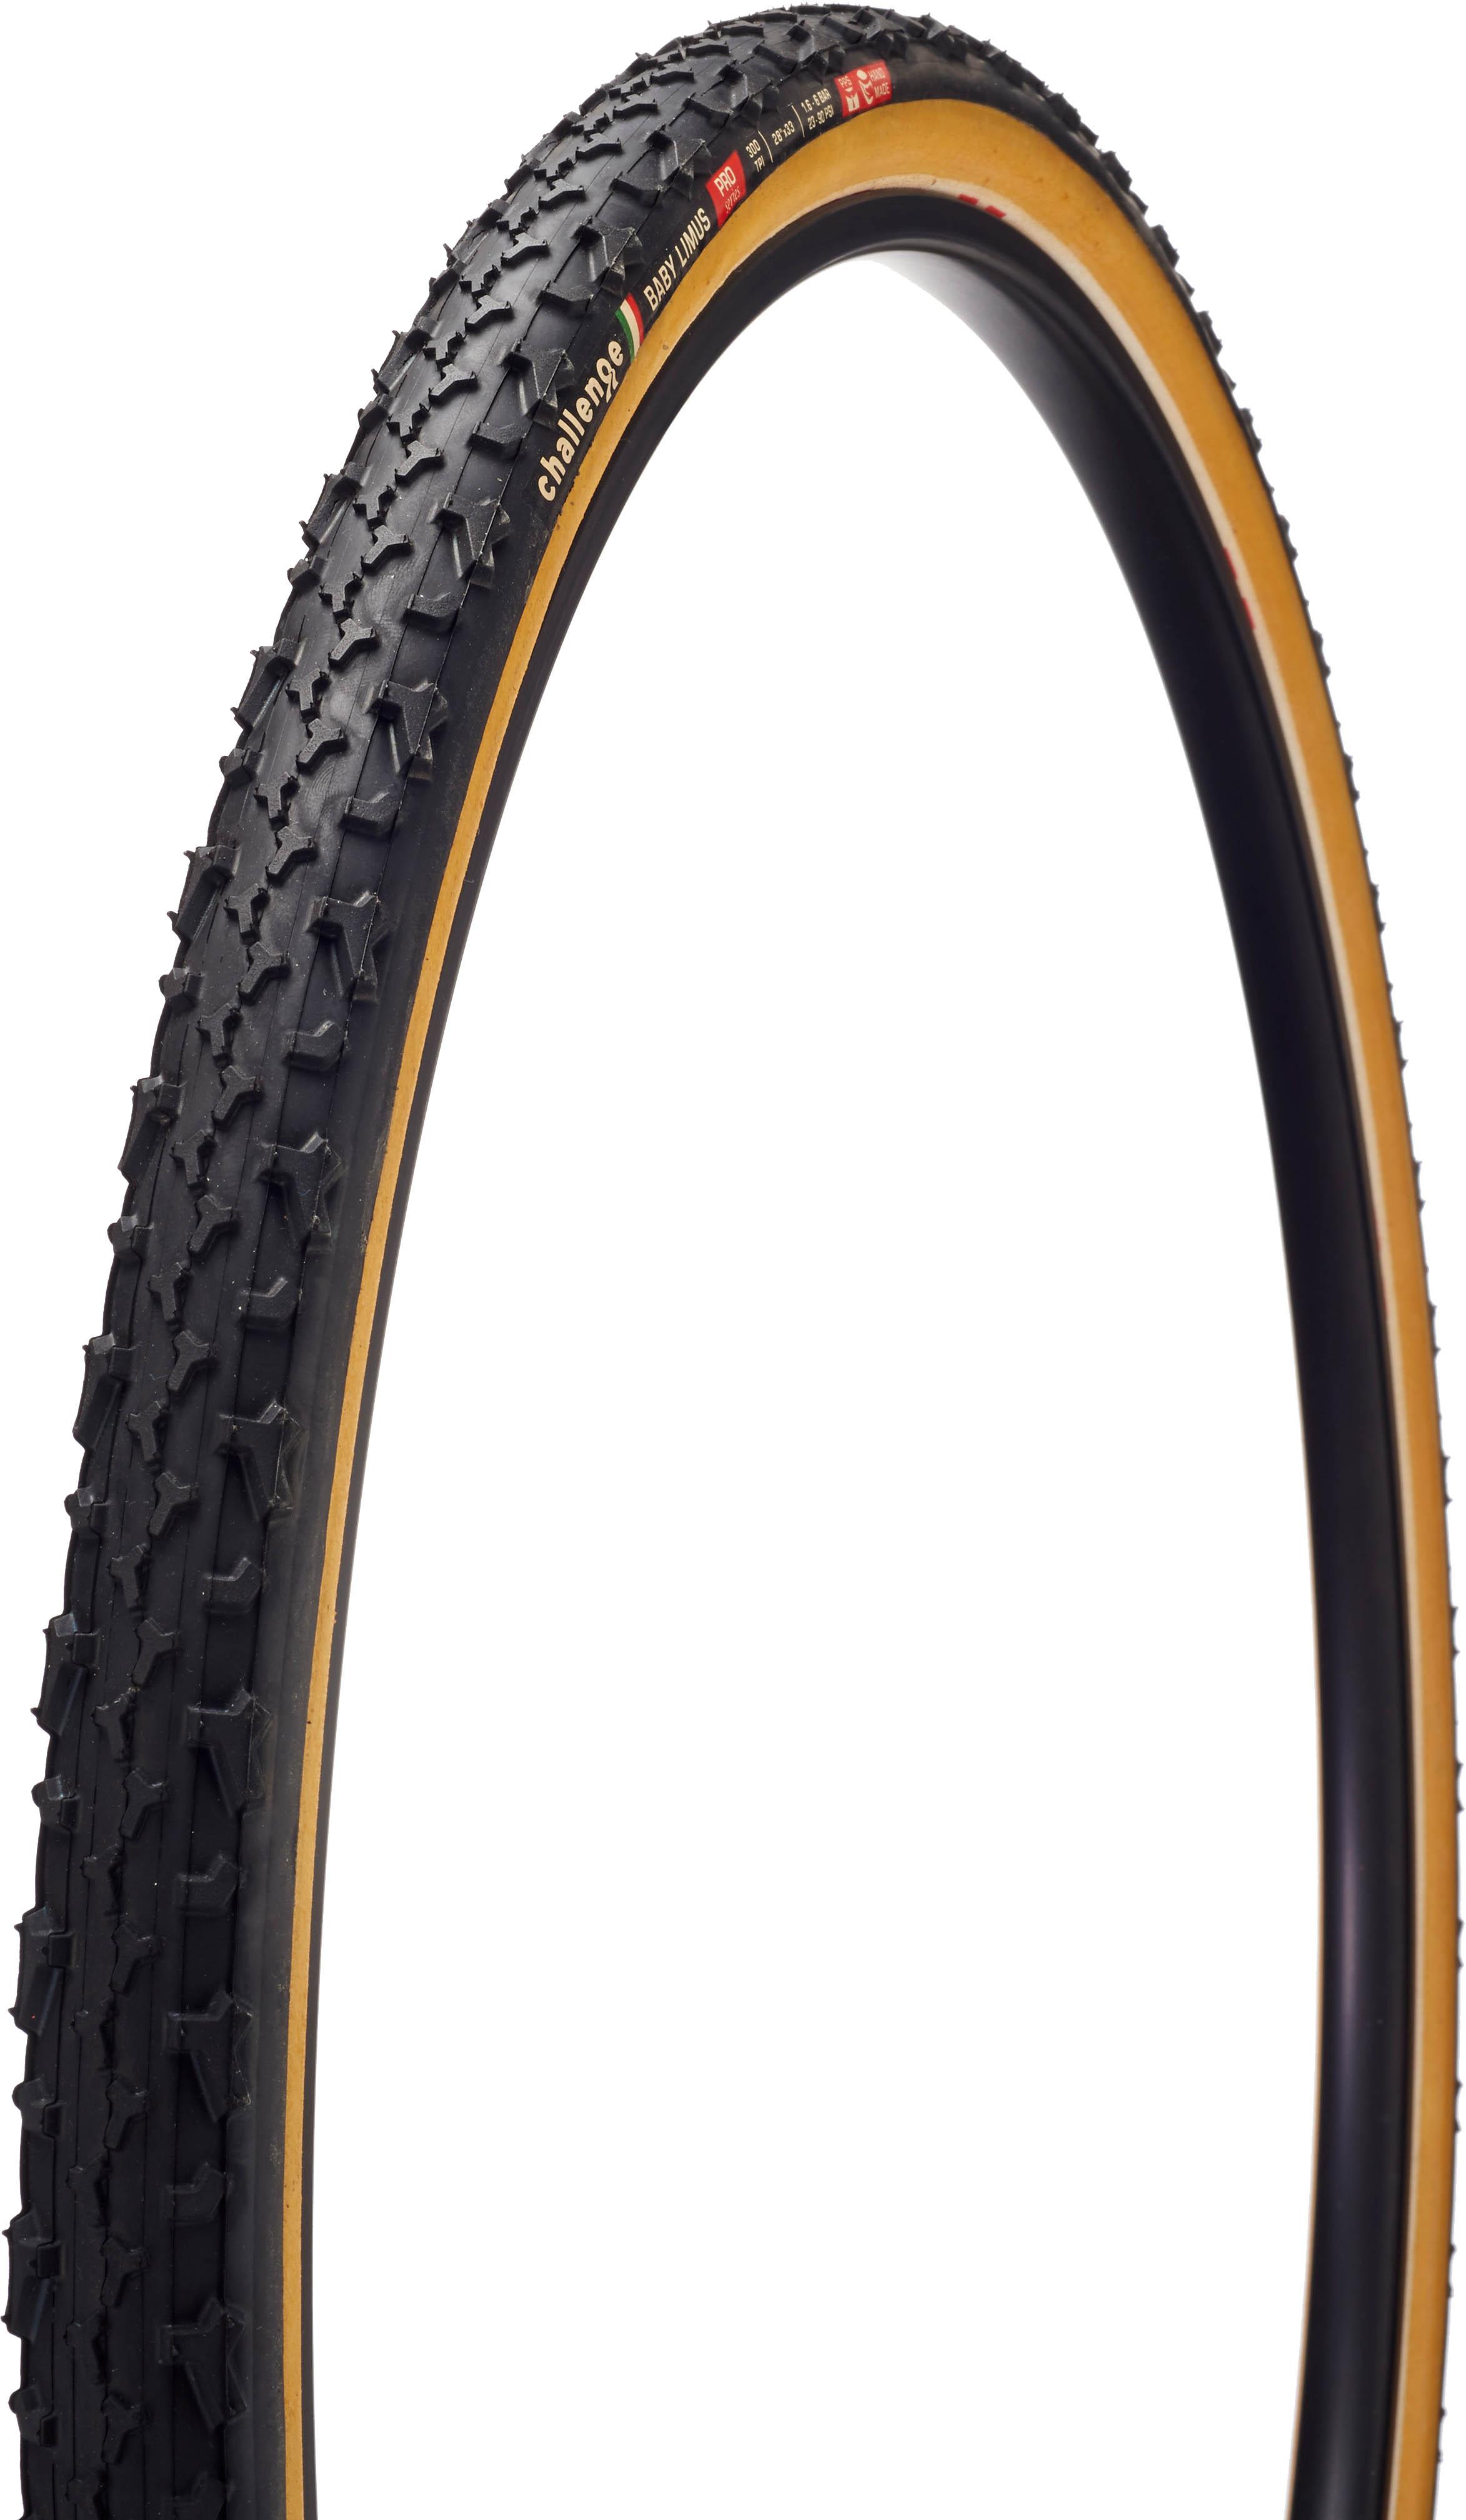 Challenge Baby Limus 33 Open Clincher Cyclocross Tyre - Black/tan Wall